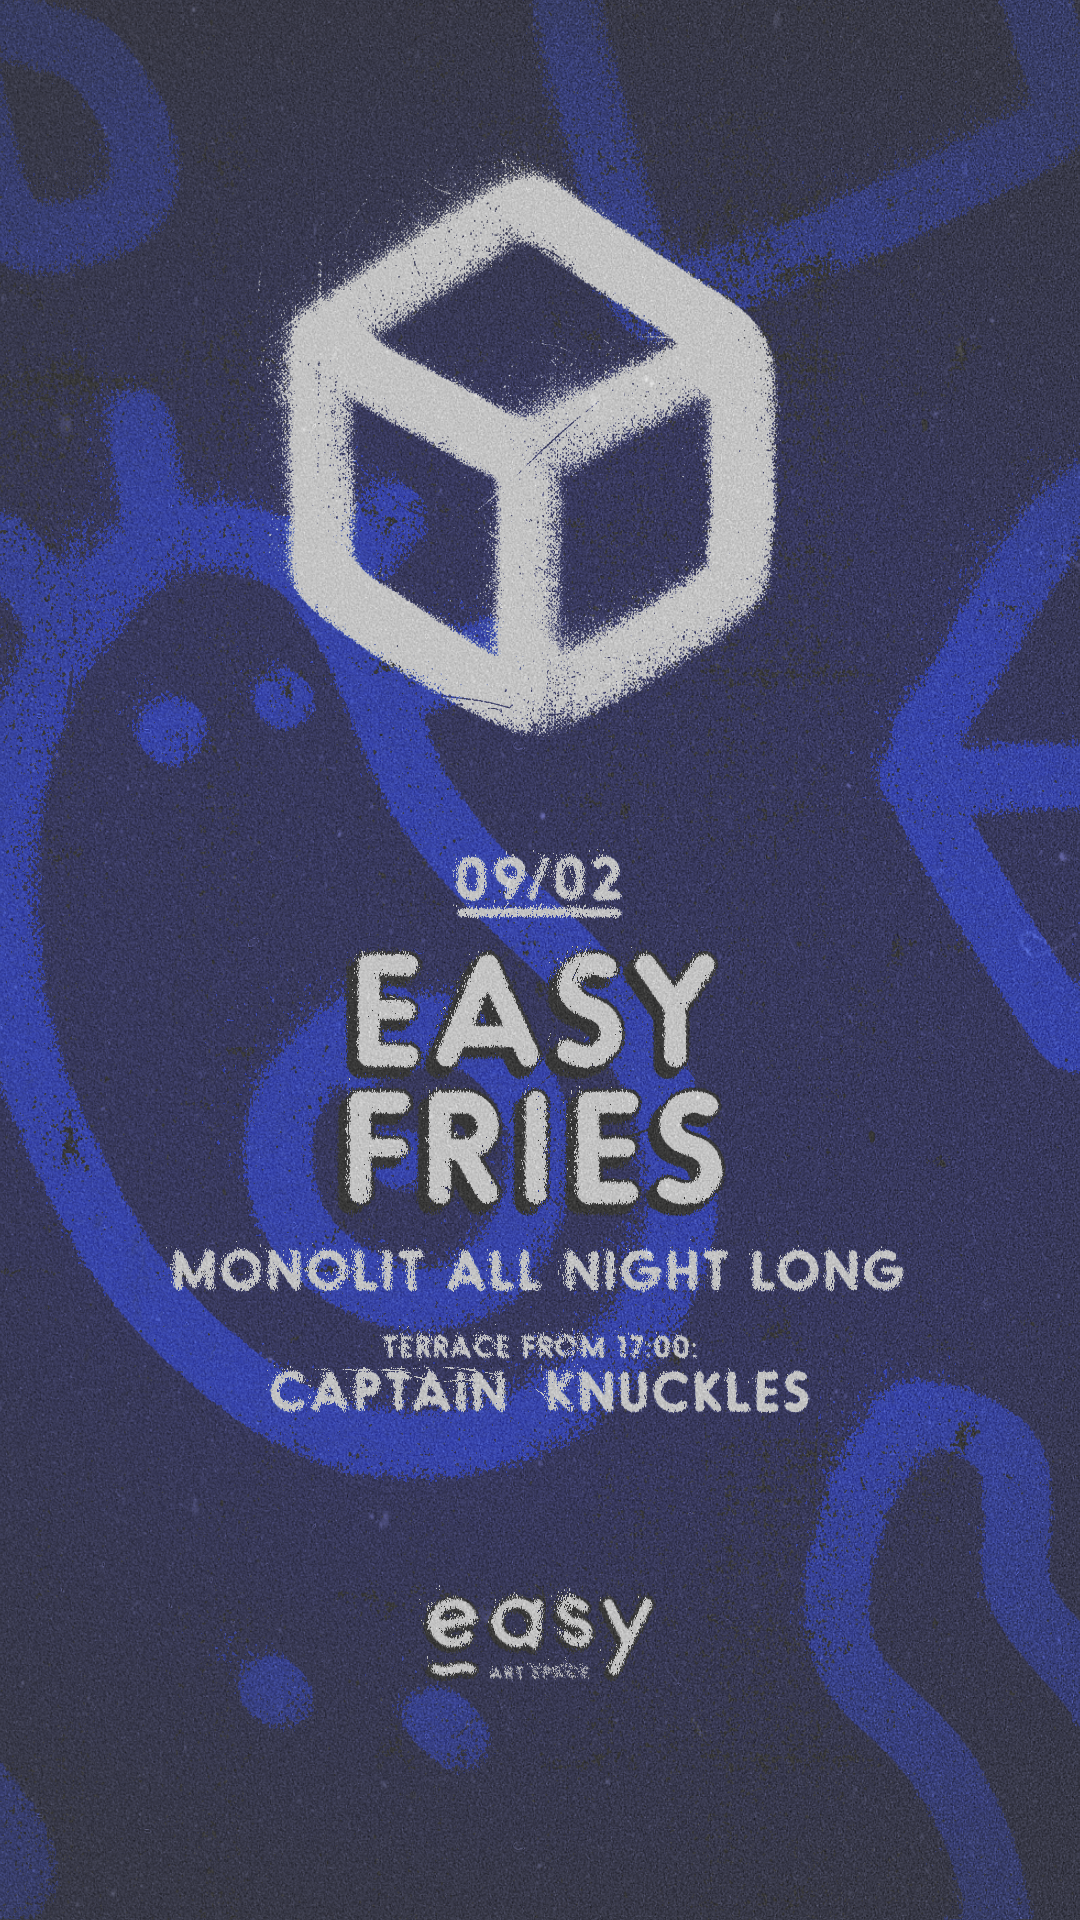 Easy Fries with Monolit All Night Long +Captain Knuckles - Página frontal